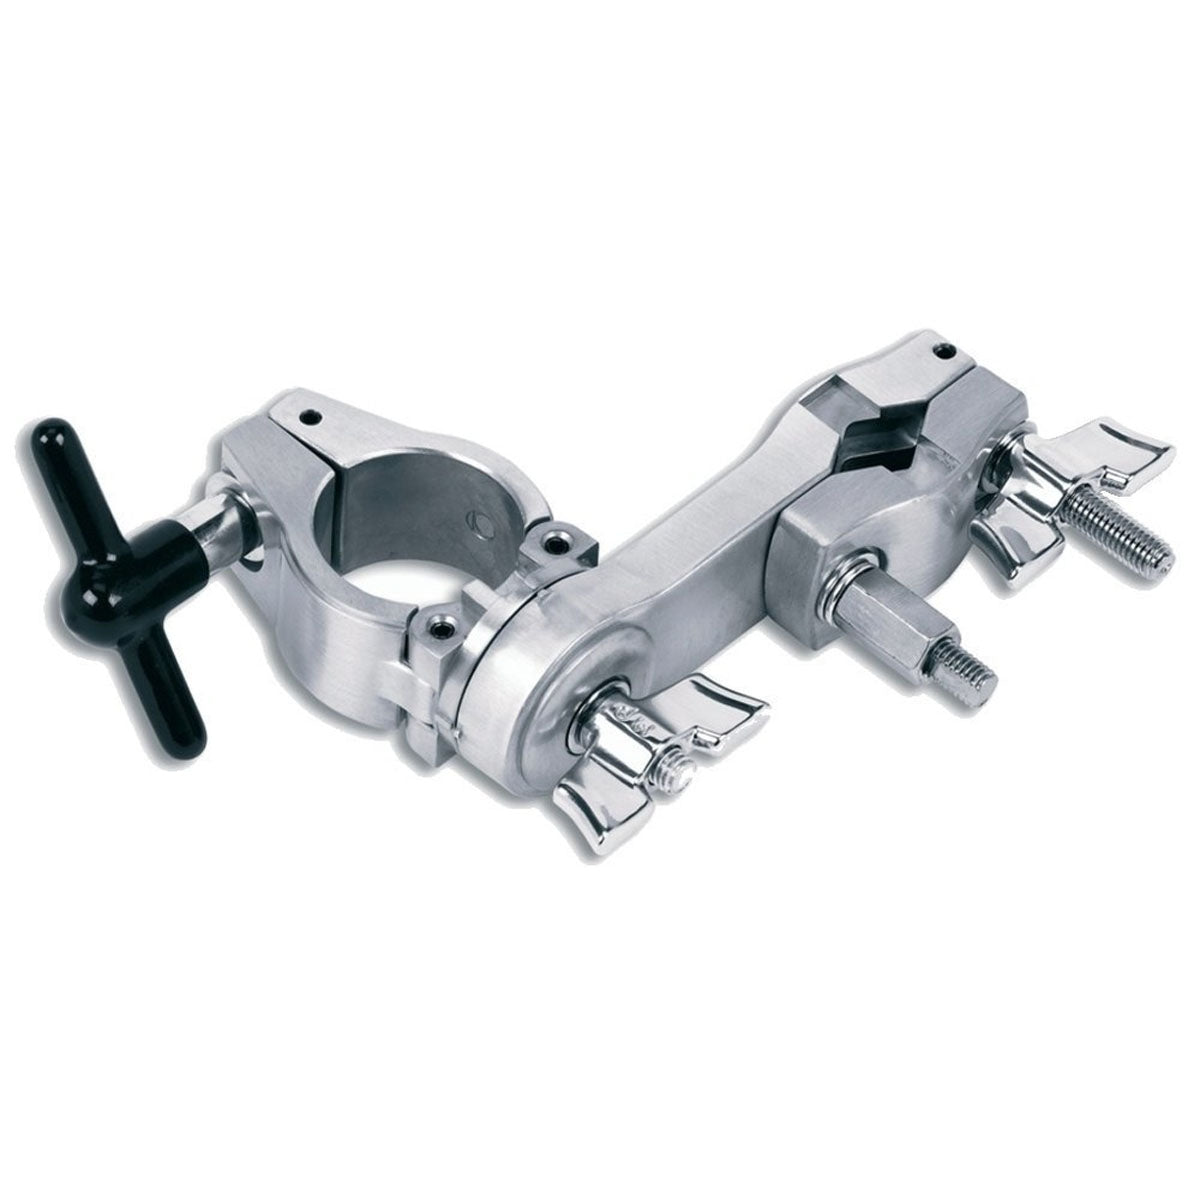 DW 9000 Rack Clamp - 1.5" to V-Accessory Clamp